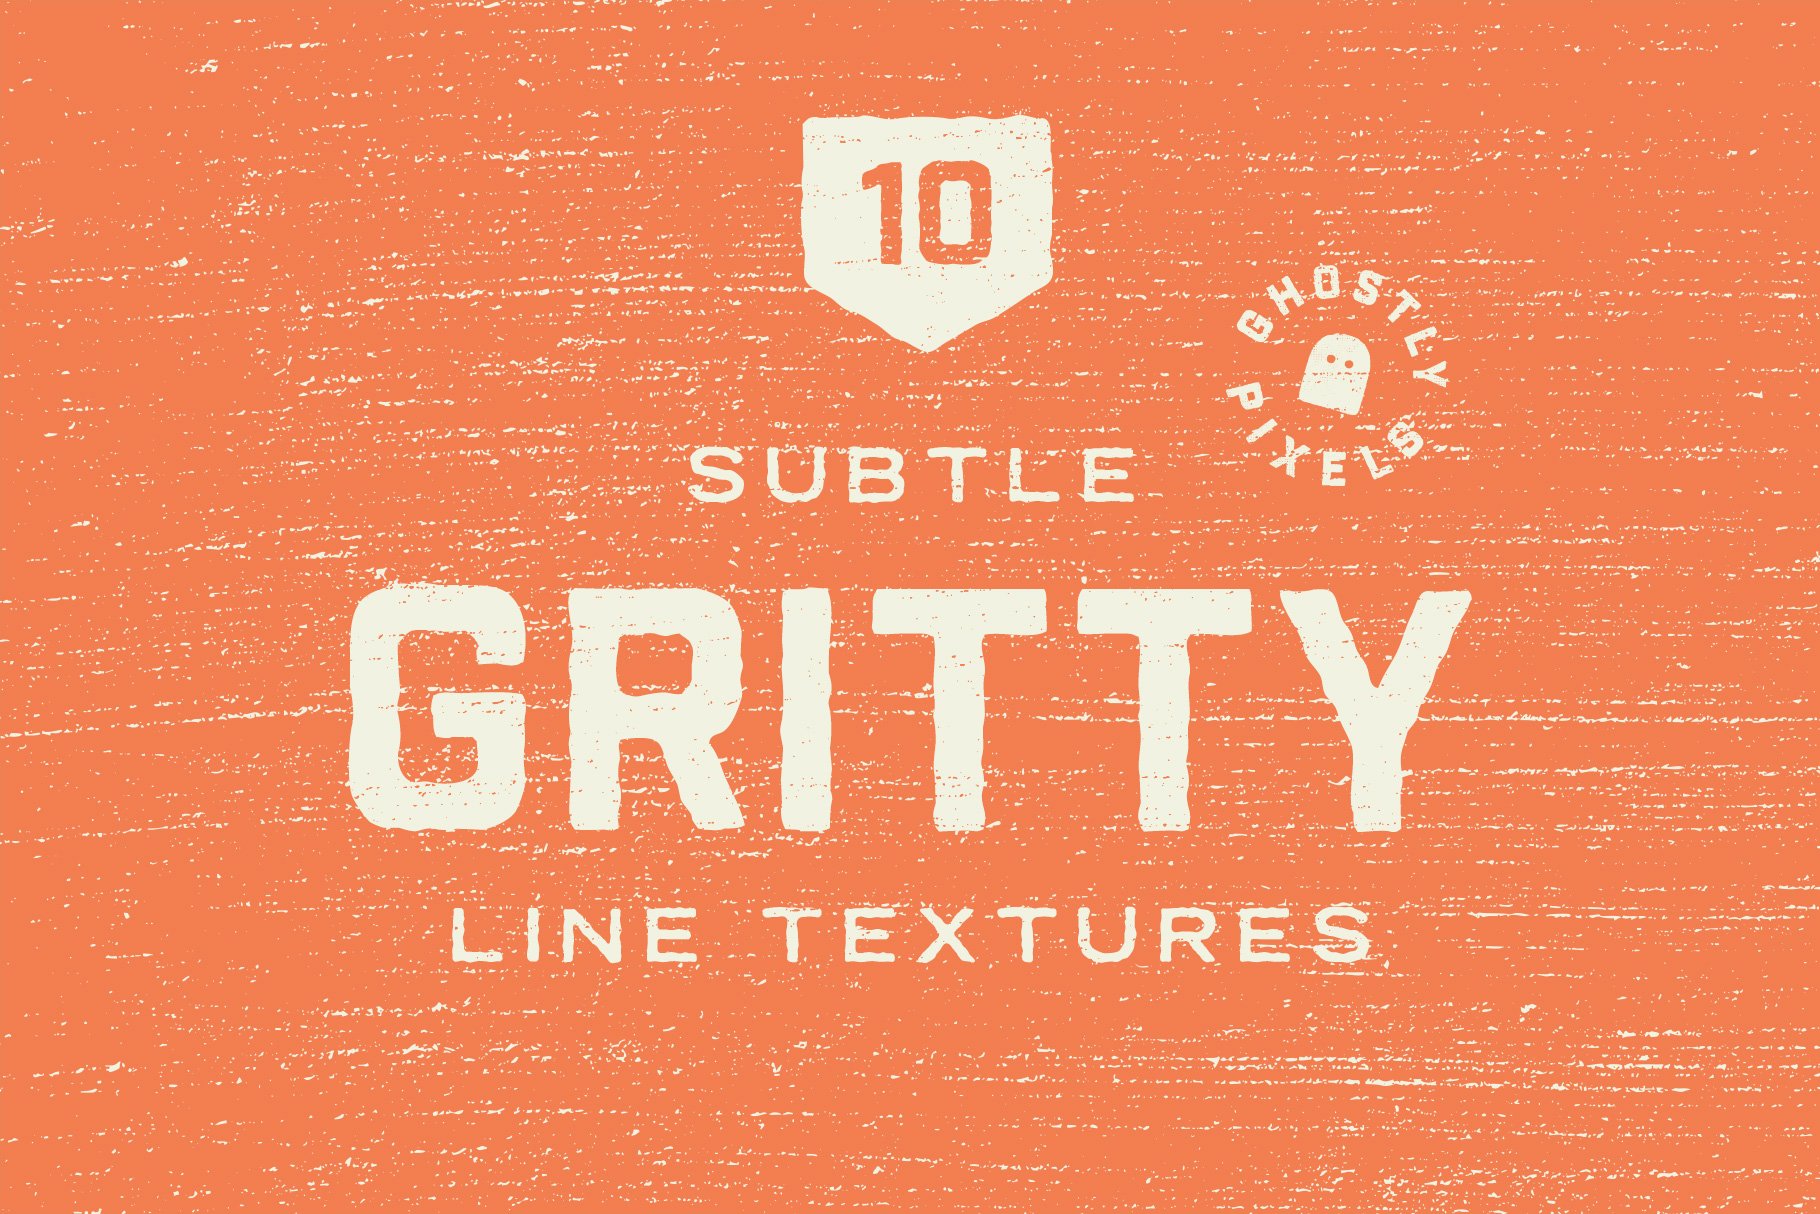 Subtle Gritty Lines Textures cover image.